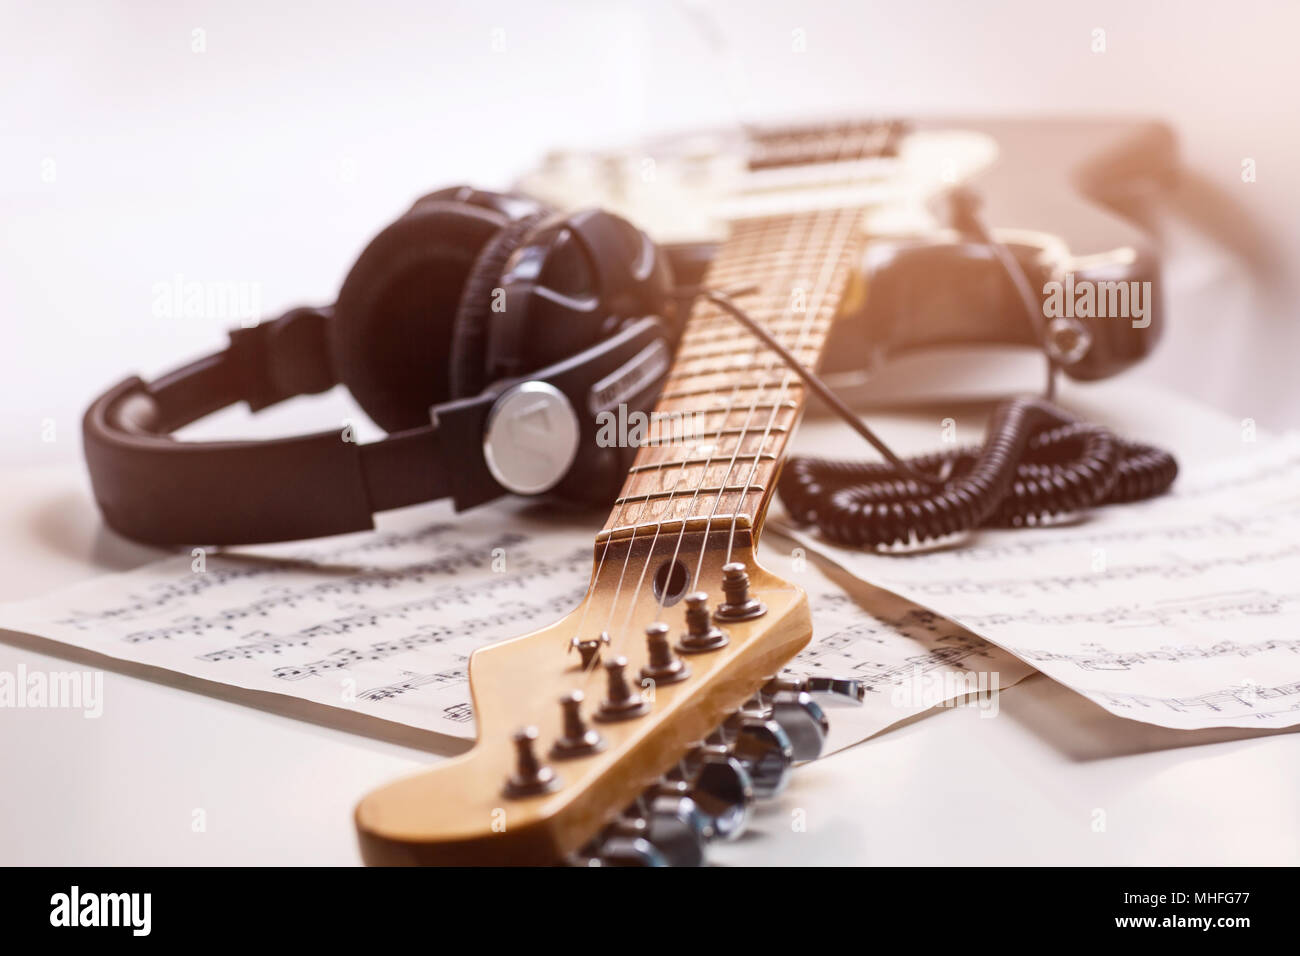 Electric guitar and headphones with music notes. Stock Photo